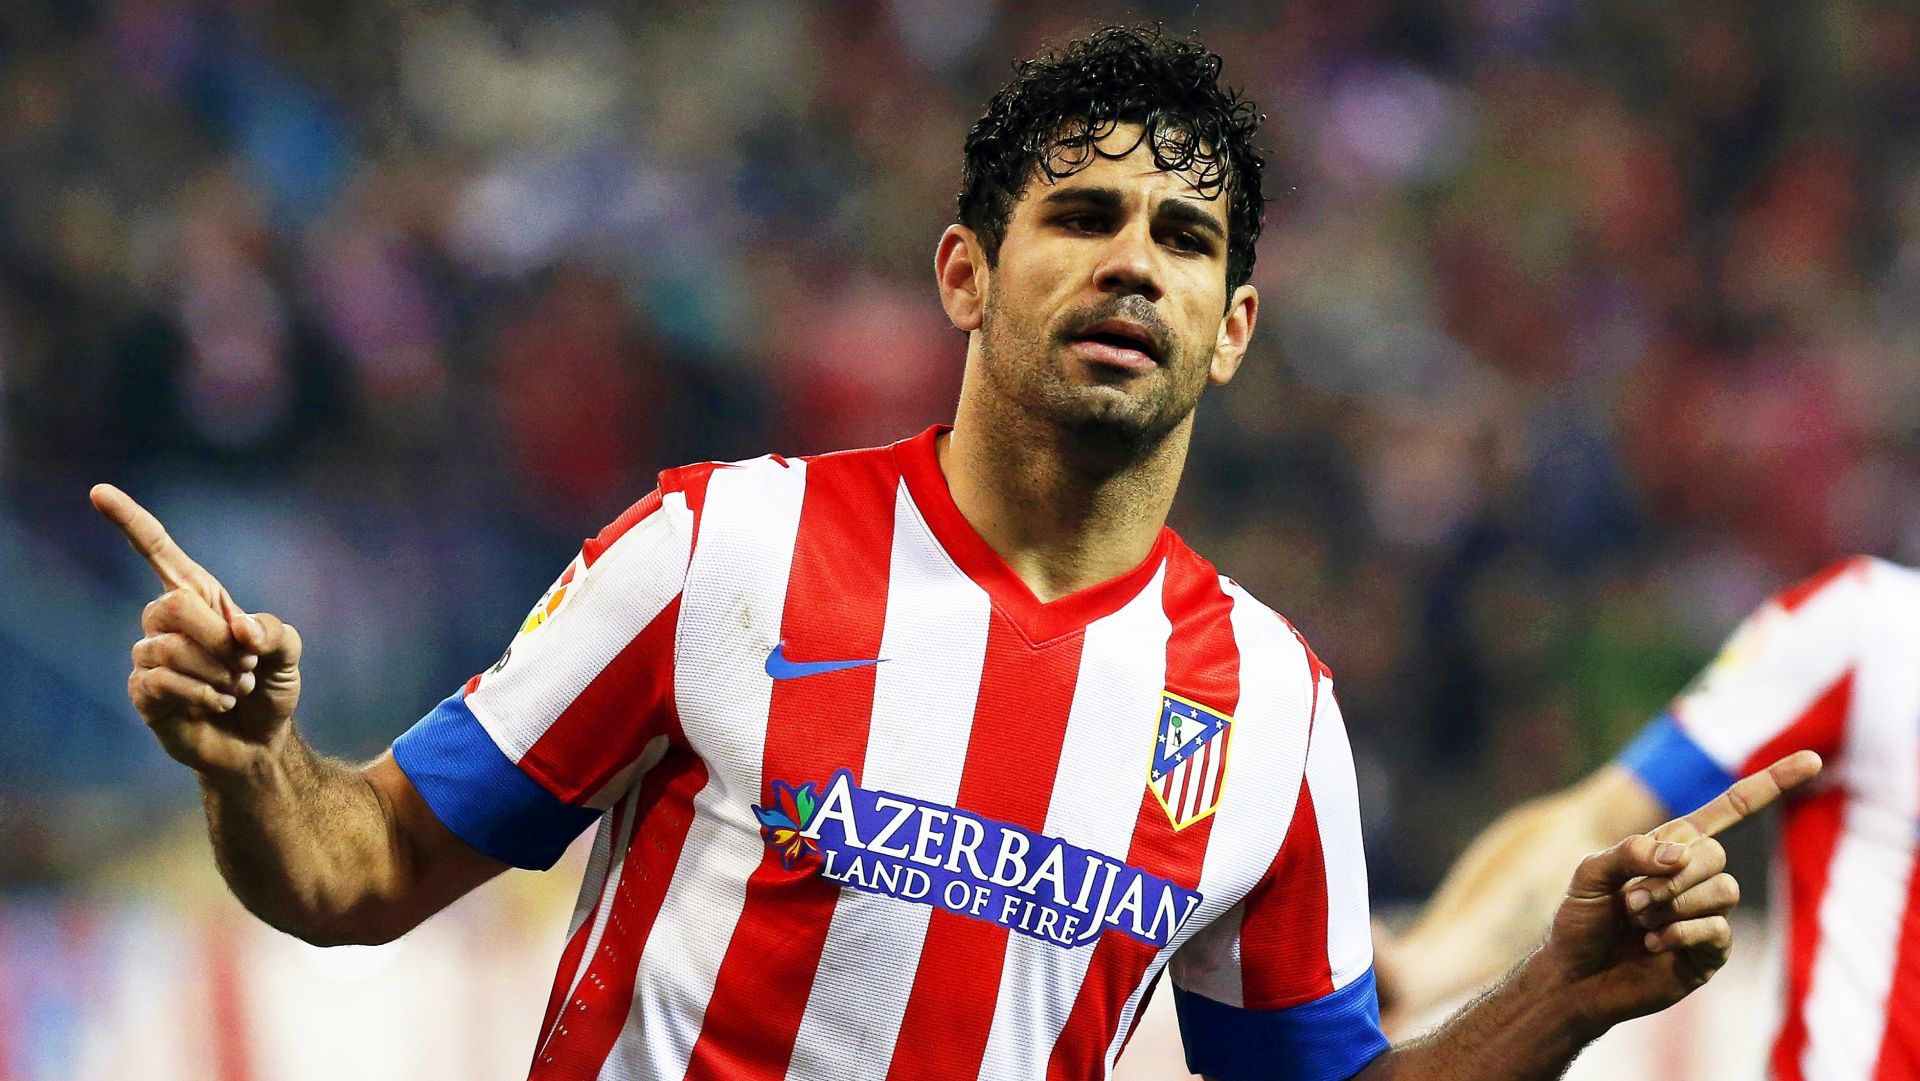 epa06217851 (FILE) - Atletico Madrid's Diego Costa celebrates after scoring during the Spanish King's Cup semi final, first leg soccer match against Sevilla FC at Vicente Calderon stadium in Madrid, Spain, 31 January 2013 (reissued 21 September 2017). English Premier League side Chelsea FC have agreed terms for the transfer of Diego Costa back to Spanish Primera Division side Atletico Madrid, British media reports stated on 21 September 2017.  EPA/JUAN CARLOS HIDALGO *** Local Caption *** 51401199